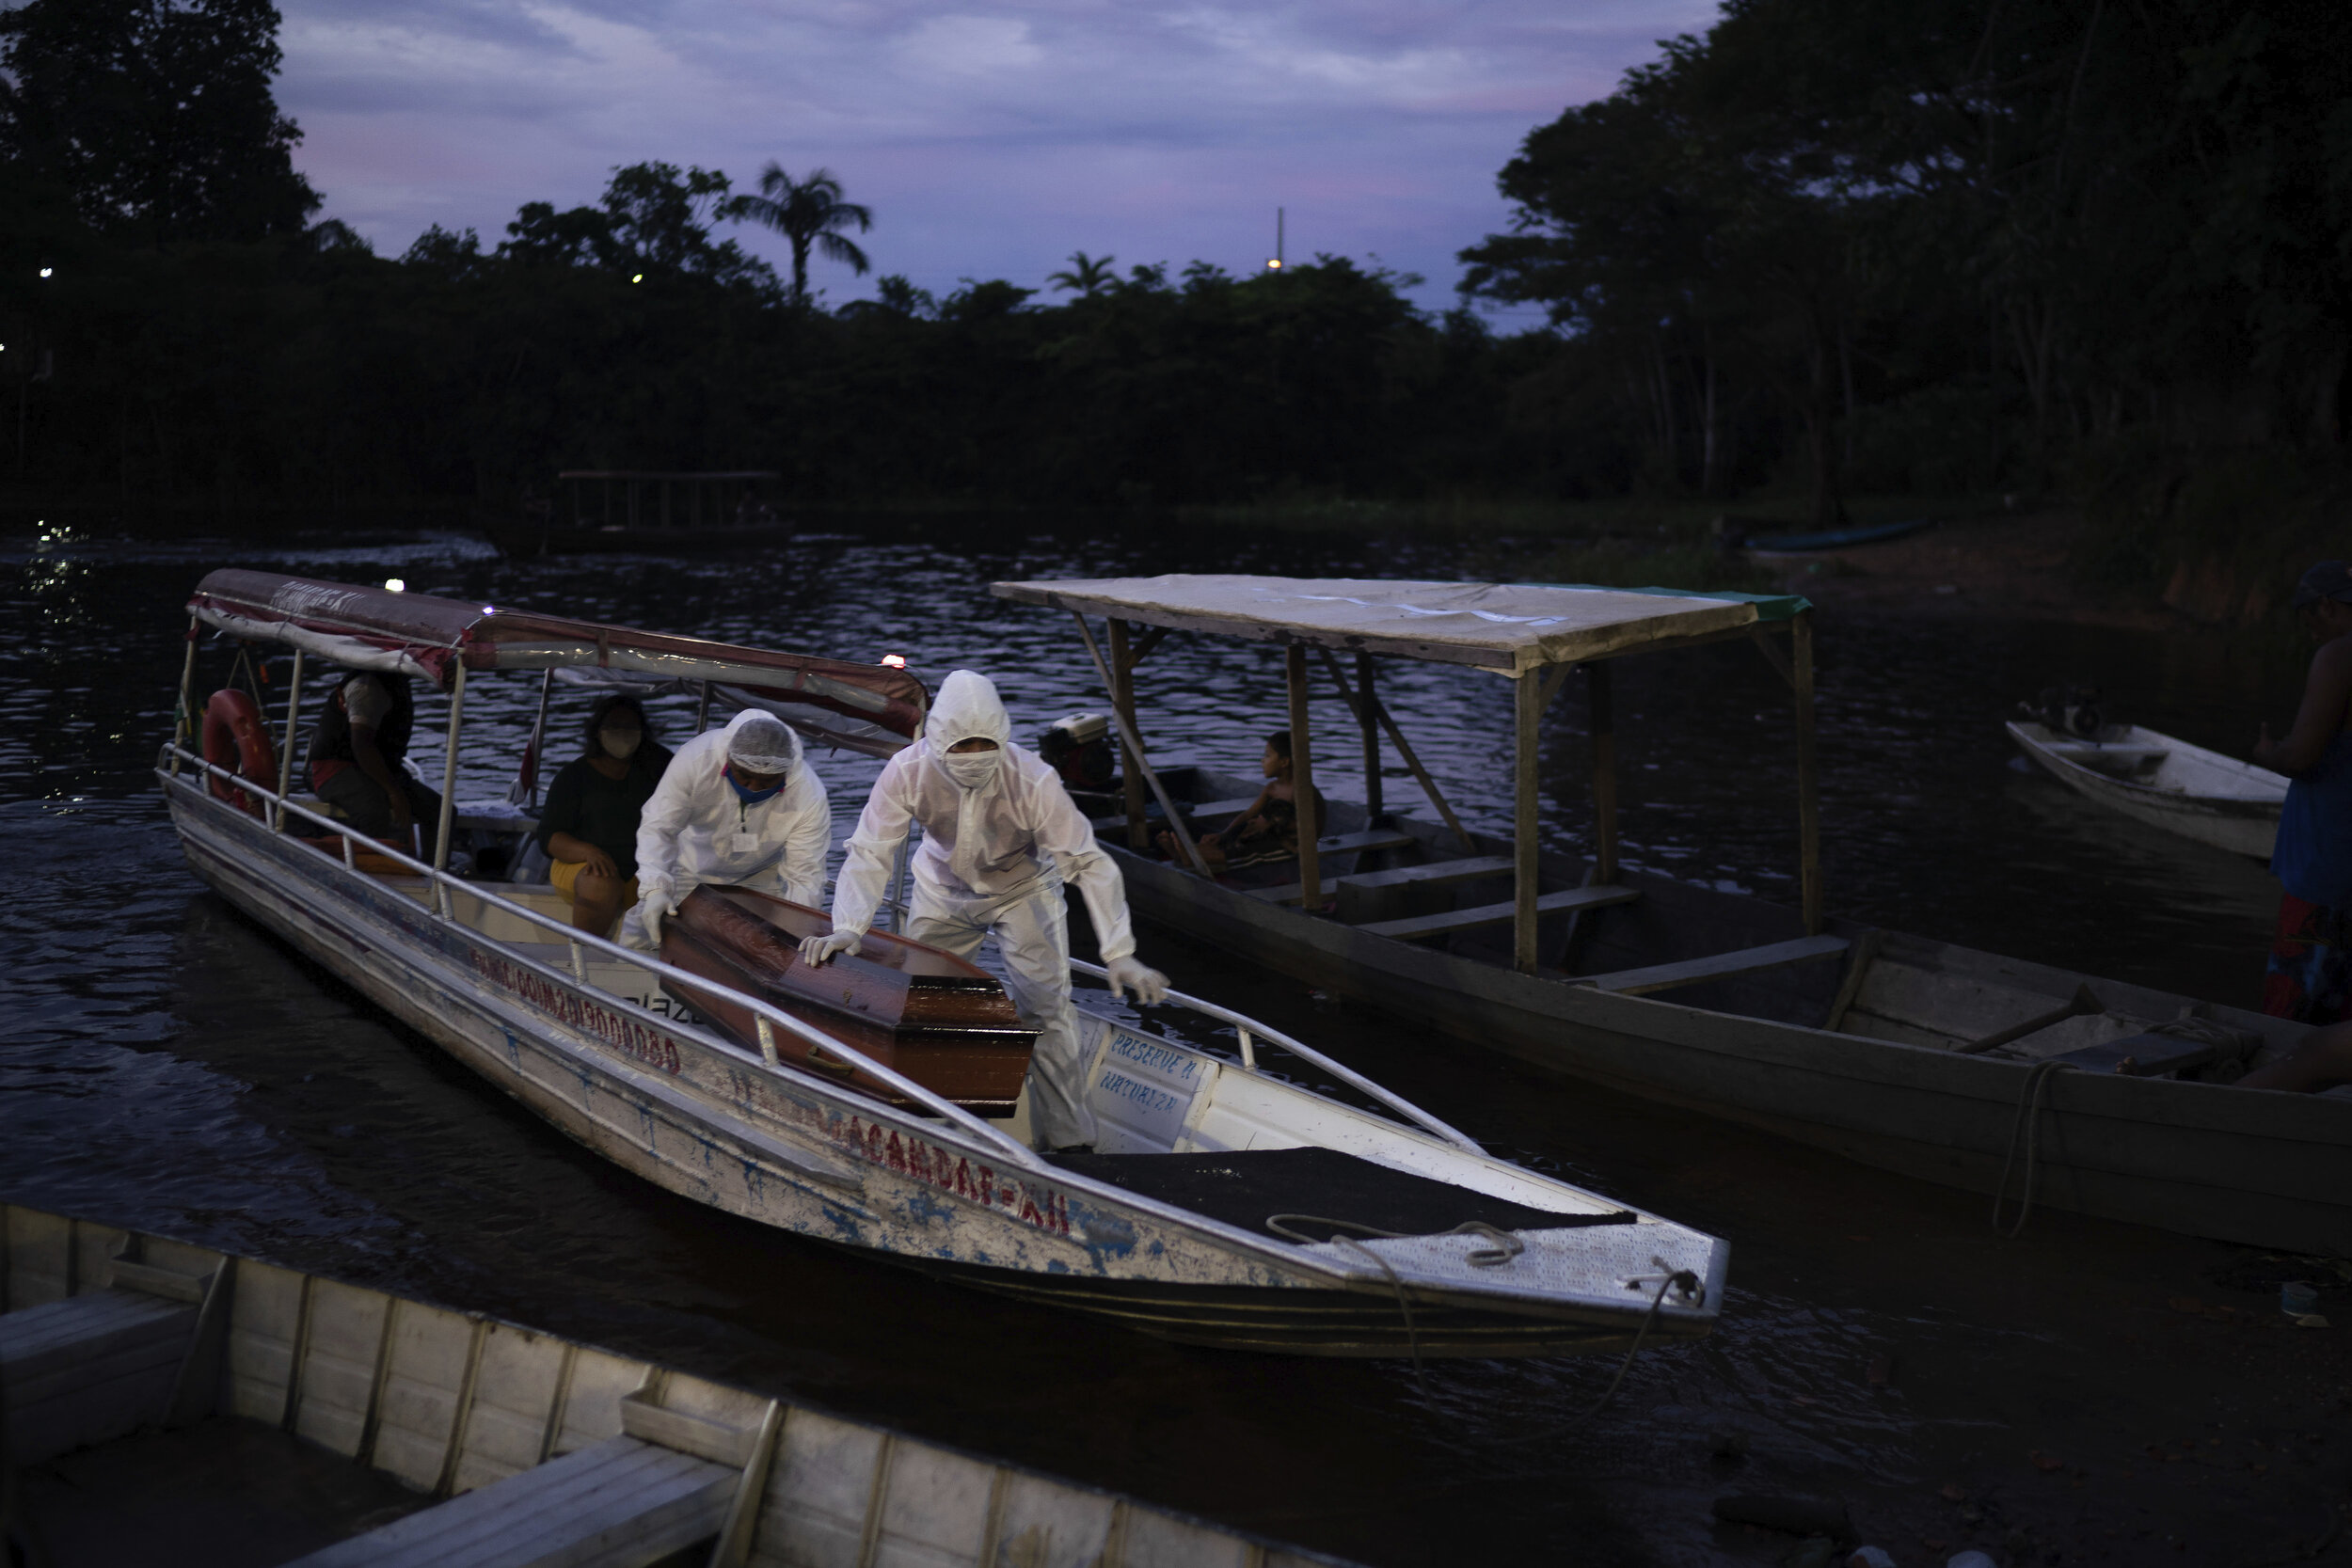  SOS Funeral workers transport by boat a remains of an 86-year-old woman who is suspected of dying of COVID-19 in her river-side community near Manaus, Brazil, May 14, 2020. (AP Photo/Felipe Dana) 